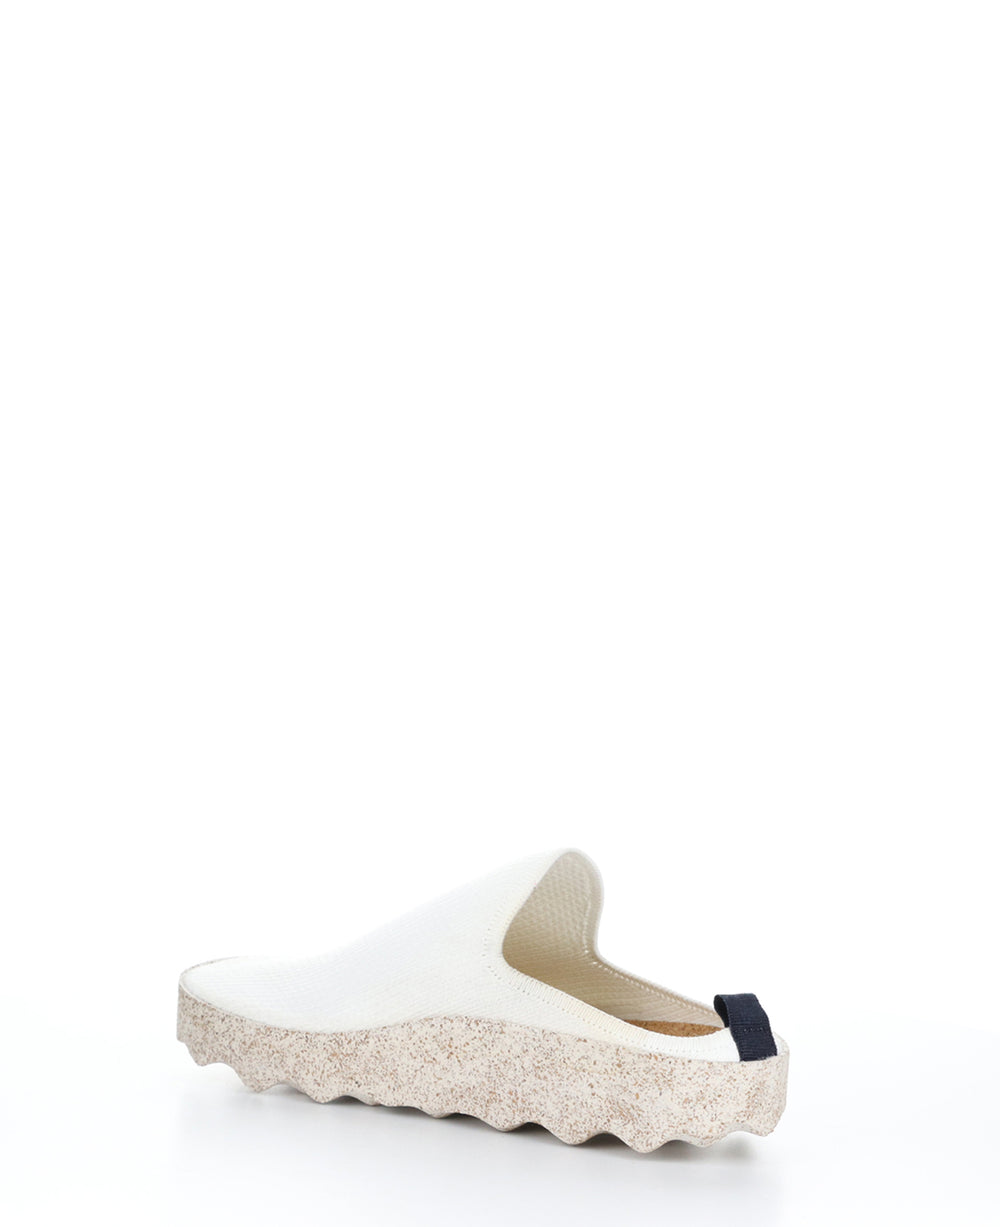 CLOG102ASP WHITE/NATURAL Slip-on Shoes|CLOG102ASP Chaussures à Bout Rond in Blanc